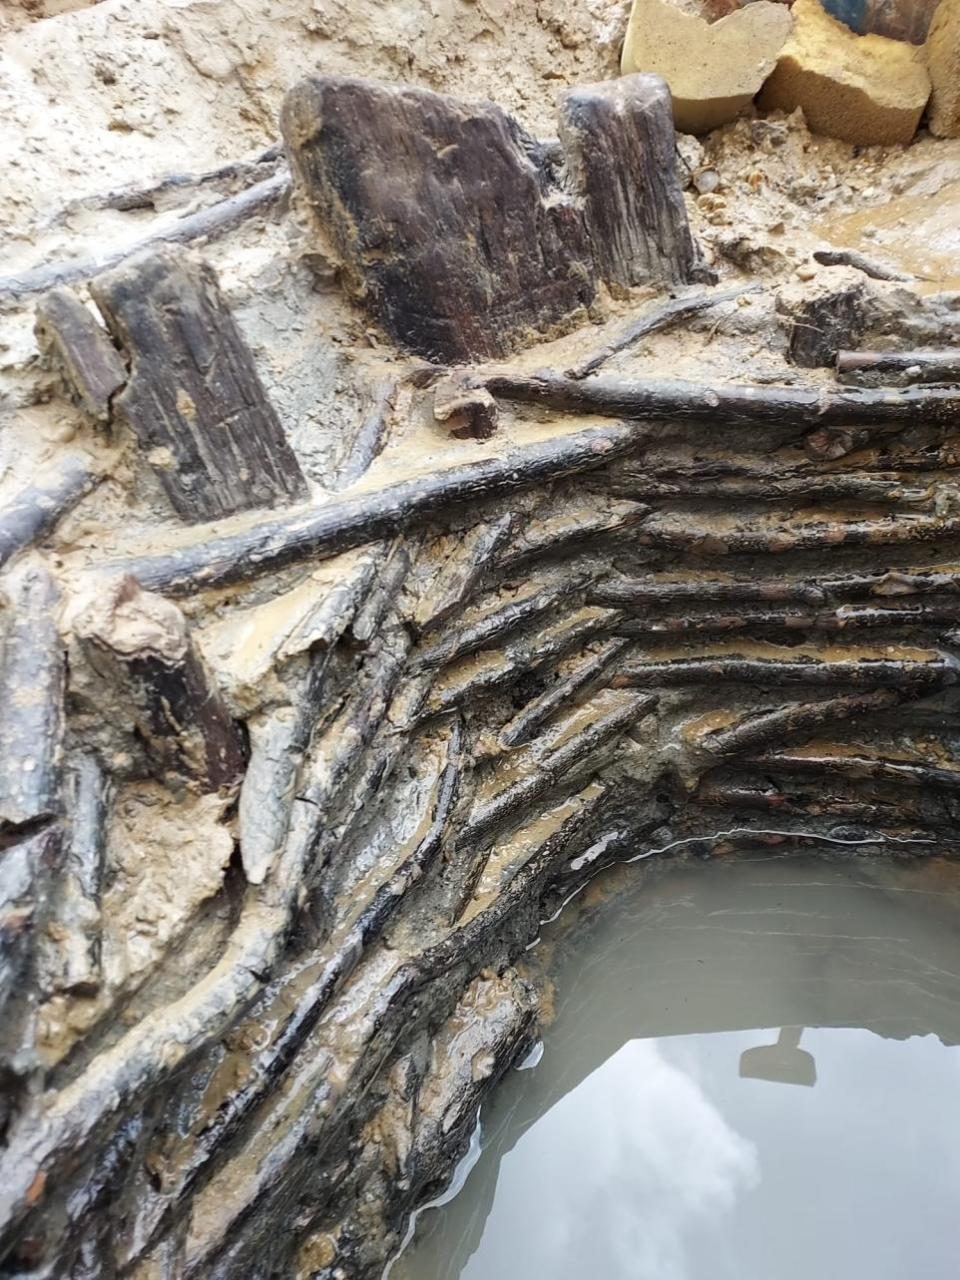 Oxford Mail: The well was still well-preserved